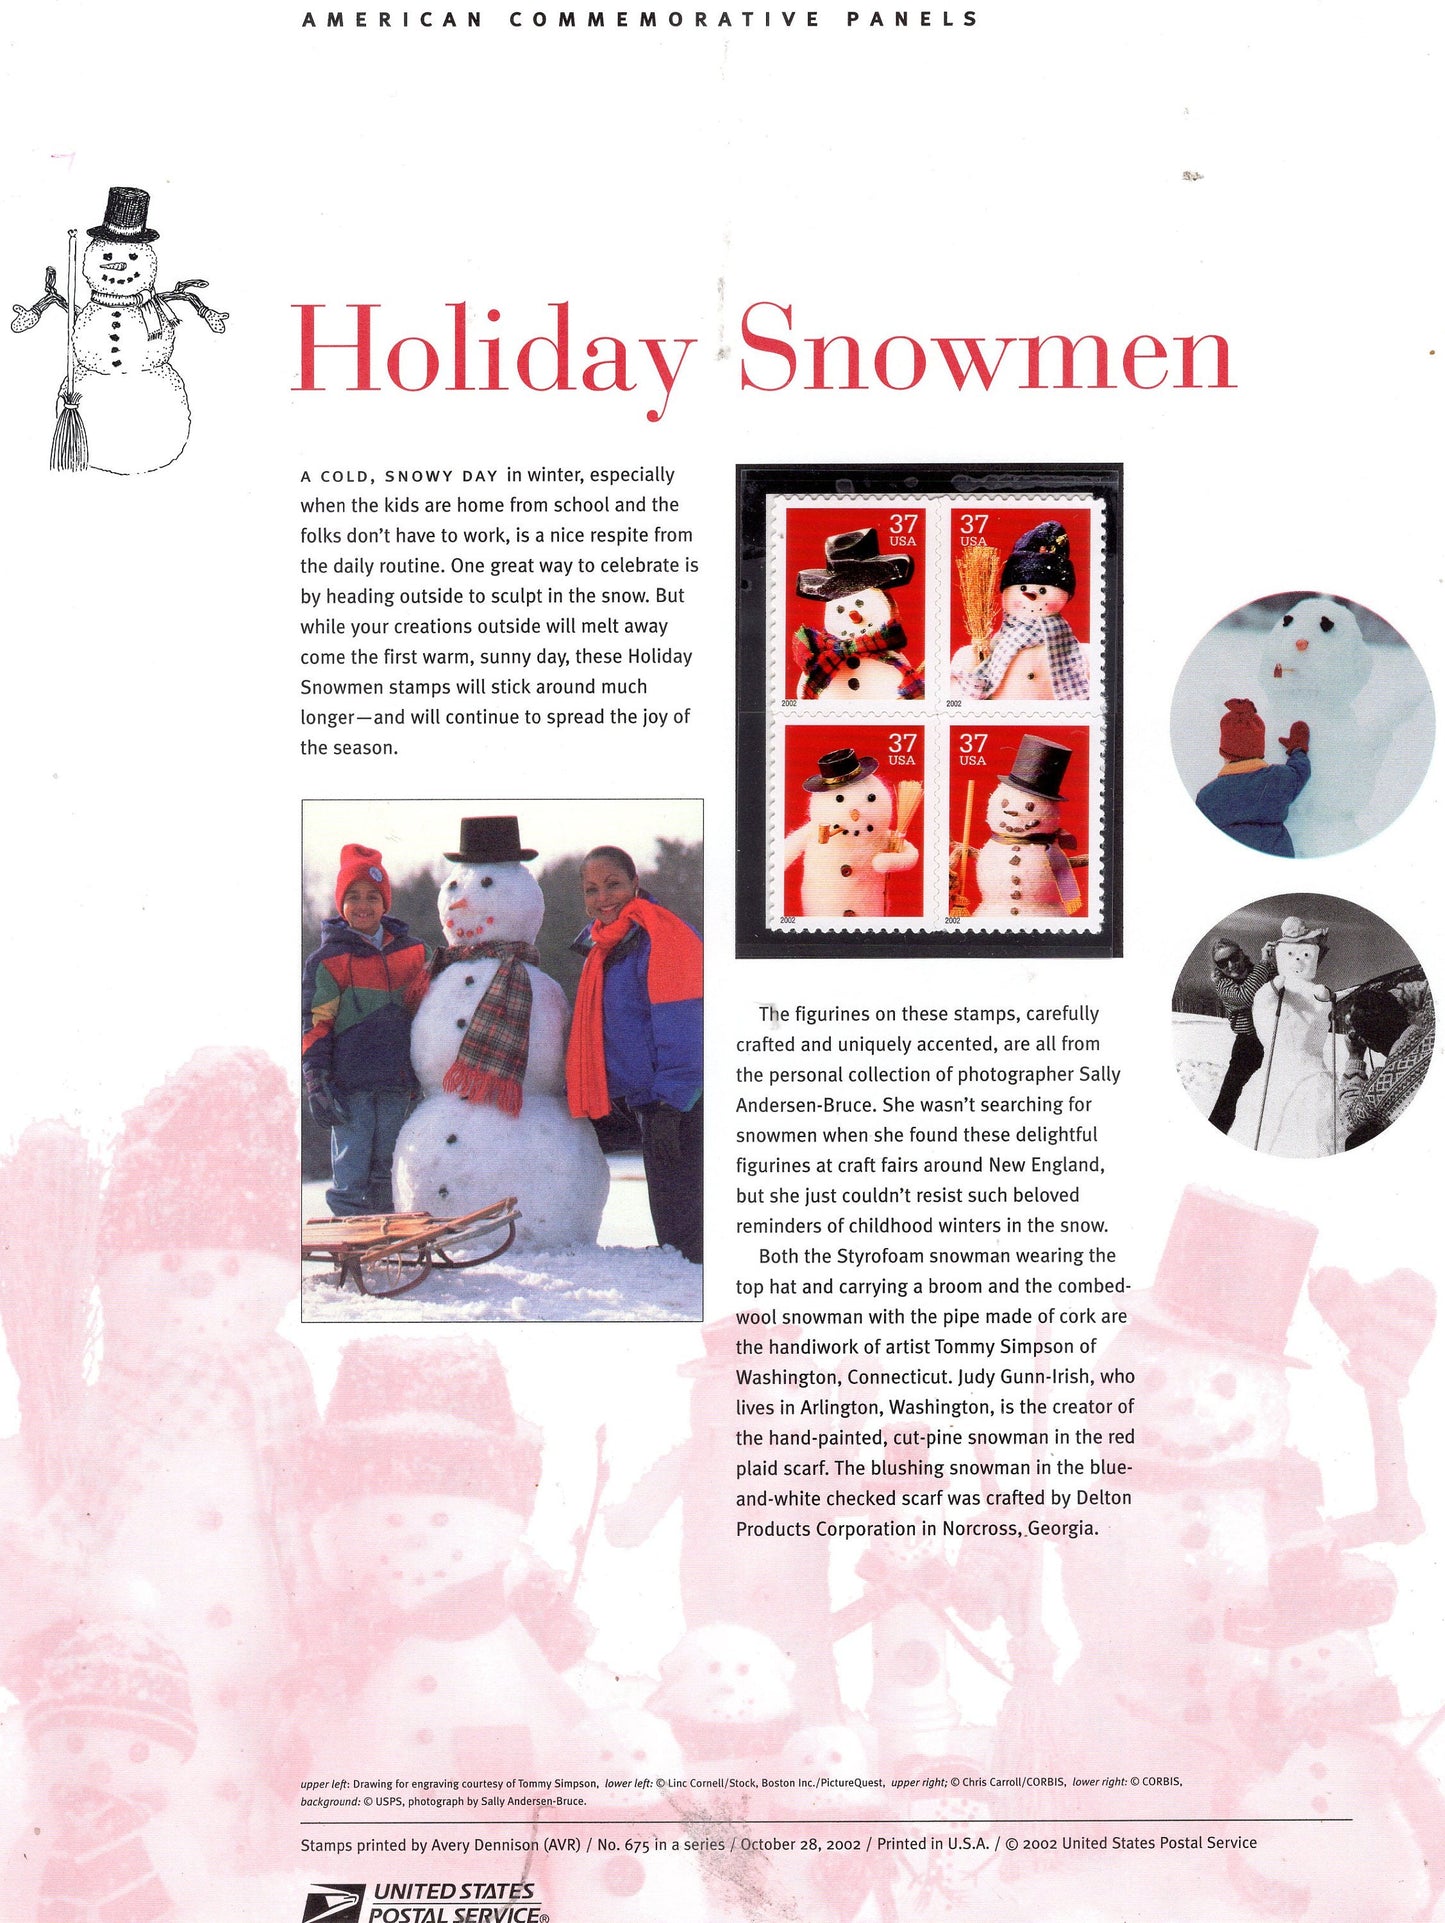 HOLIDAY SNOWMEN CHRISTMAS Commemorative Panel with a Block of 4 Stamps Illustrations plus Text – A Great Gift 8.5x11 - Issued in 2002 s675-